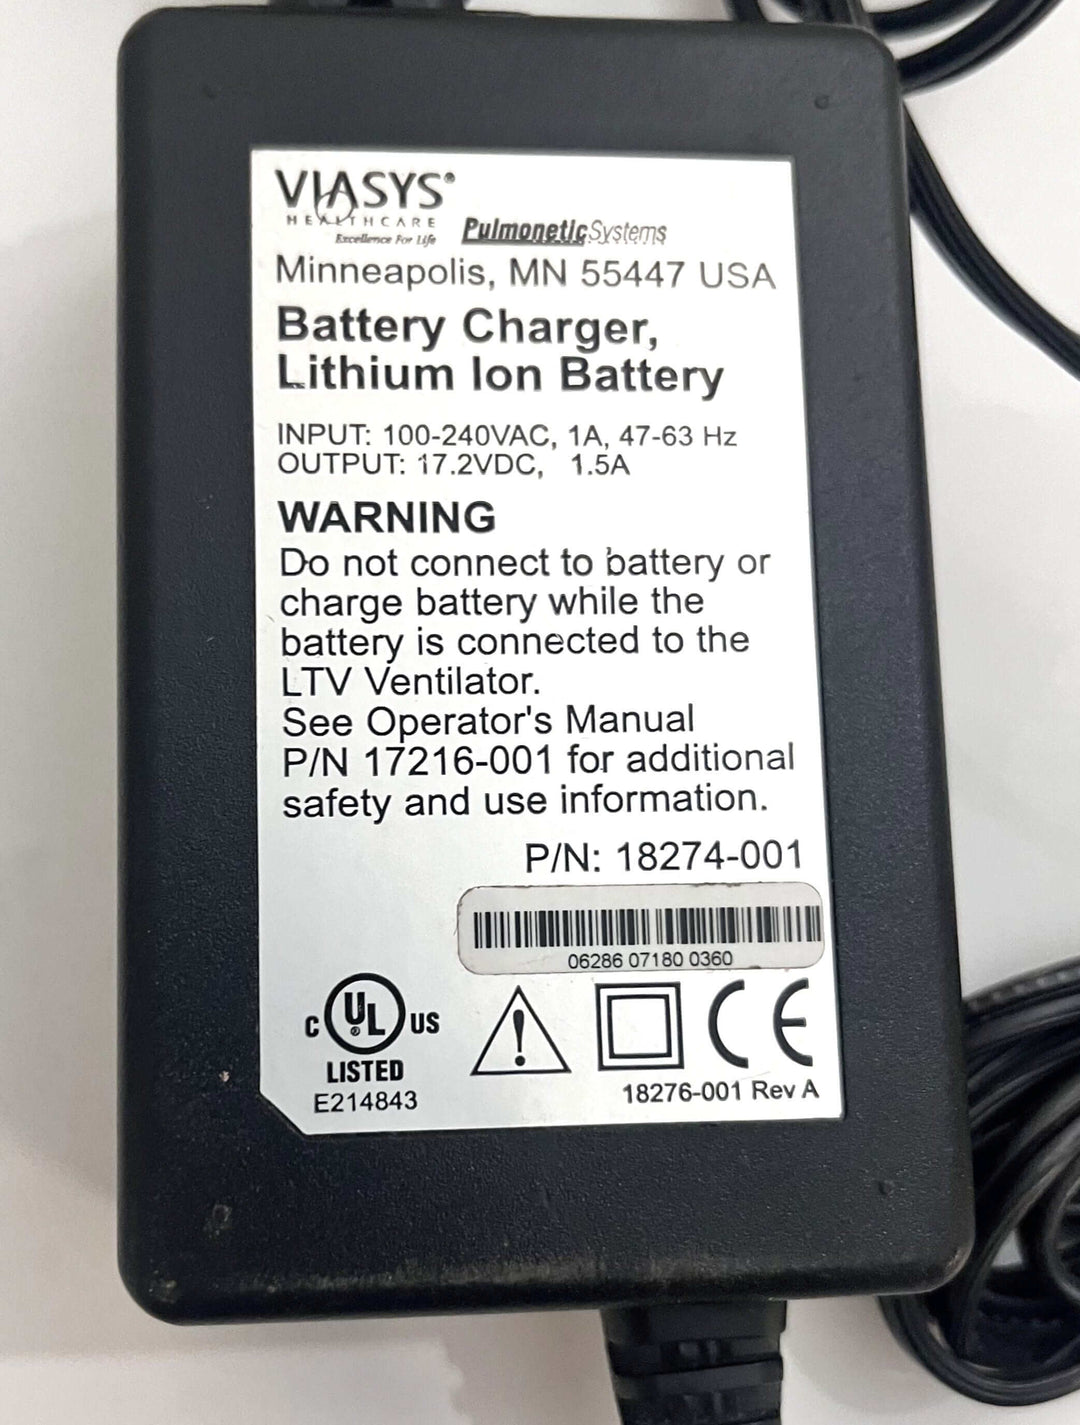 CareFusion Pulmonetic Systems LTV Transport Battery 14497-001 and Battery Charger 18274-001